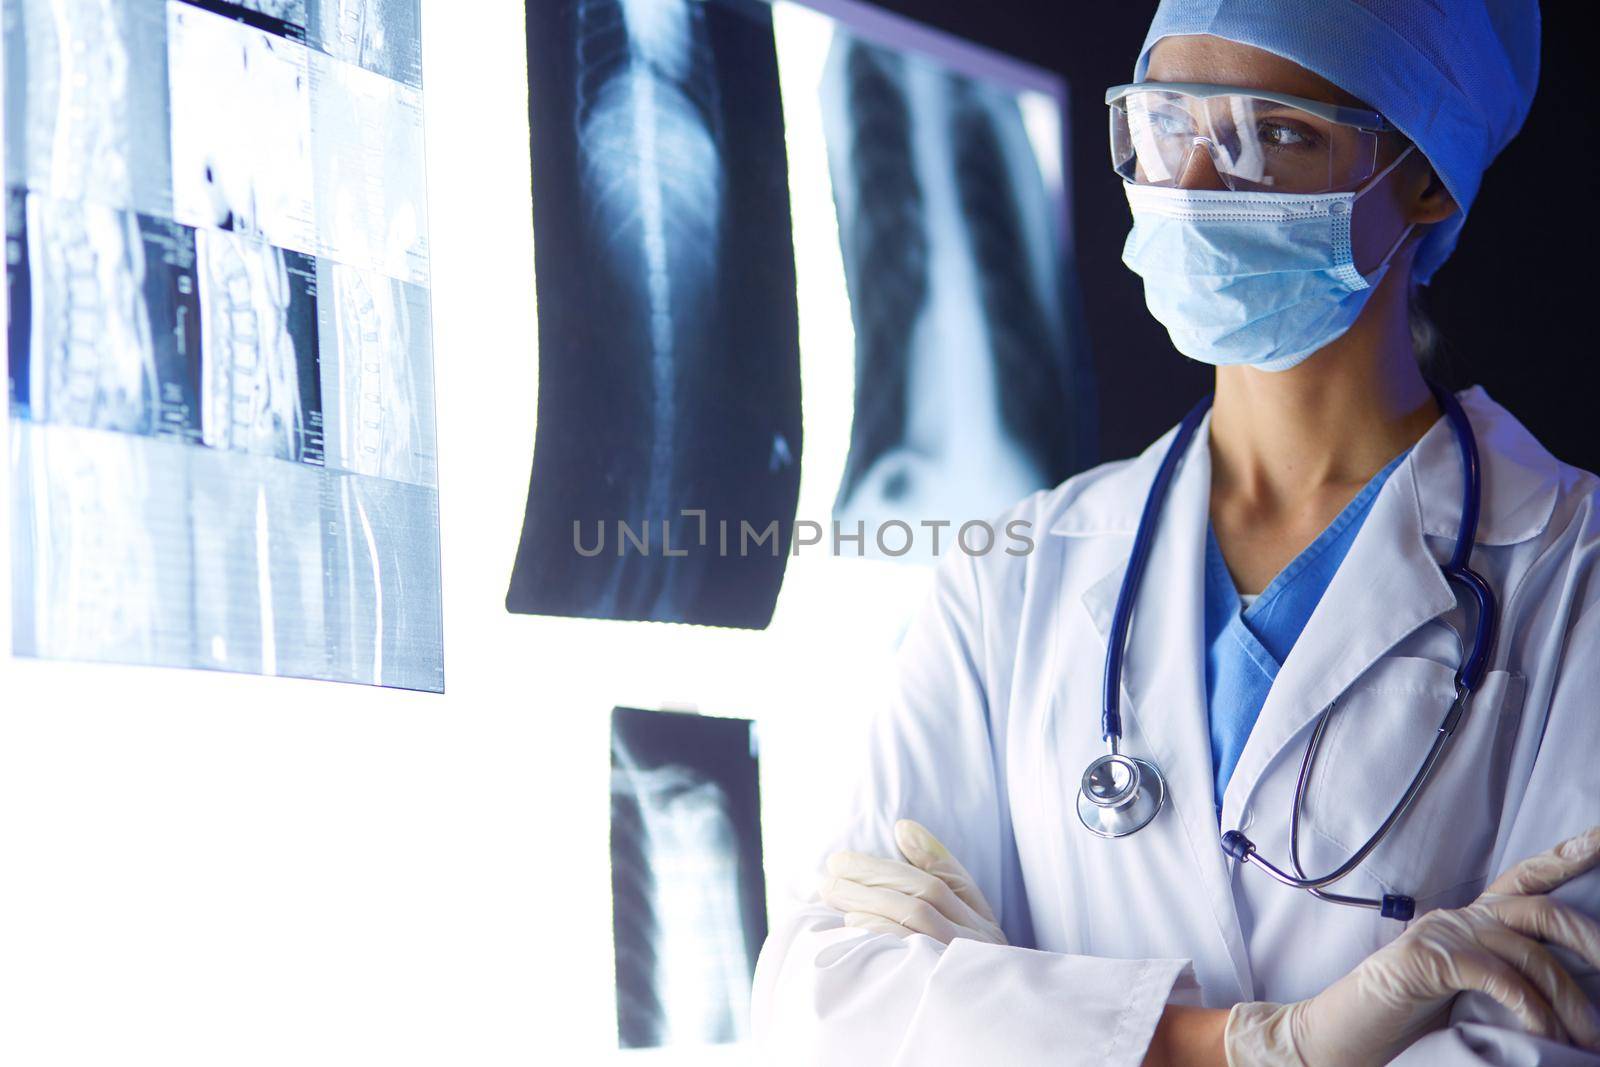 Image of attractive woman doctor looking at x-ray results